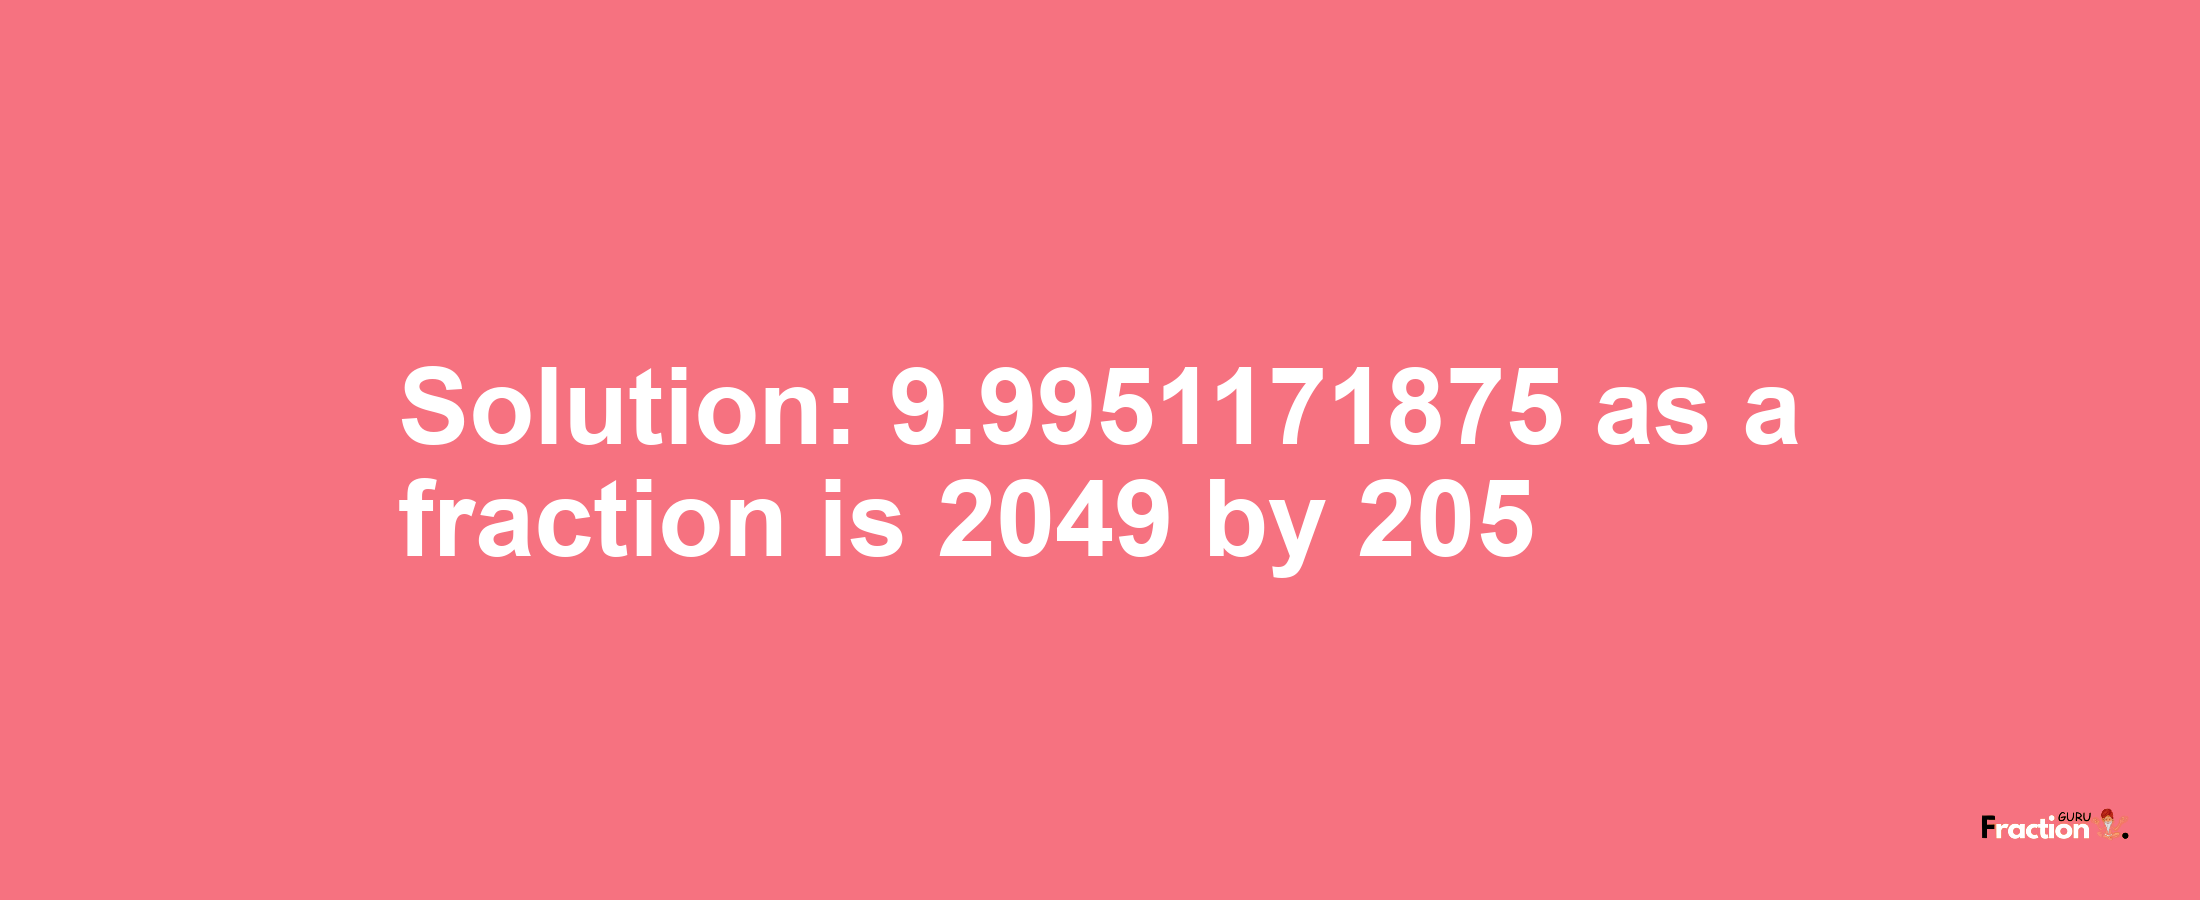 Solution:9.9951171875 as a fraction is 2049/205